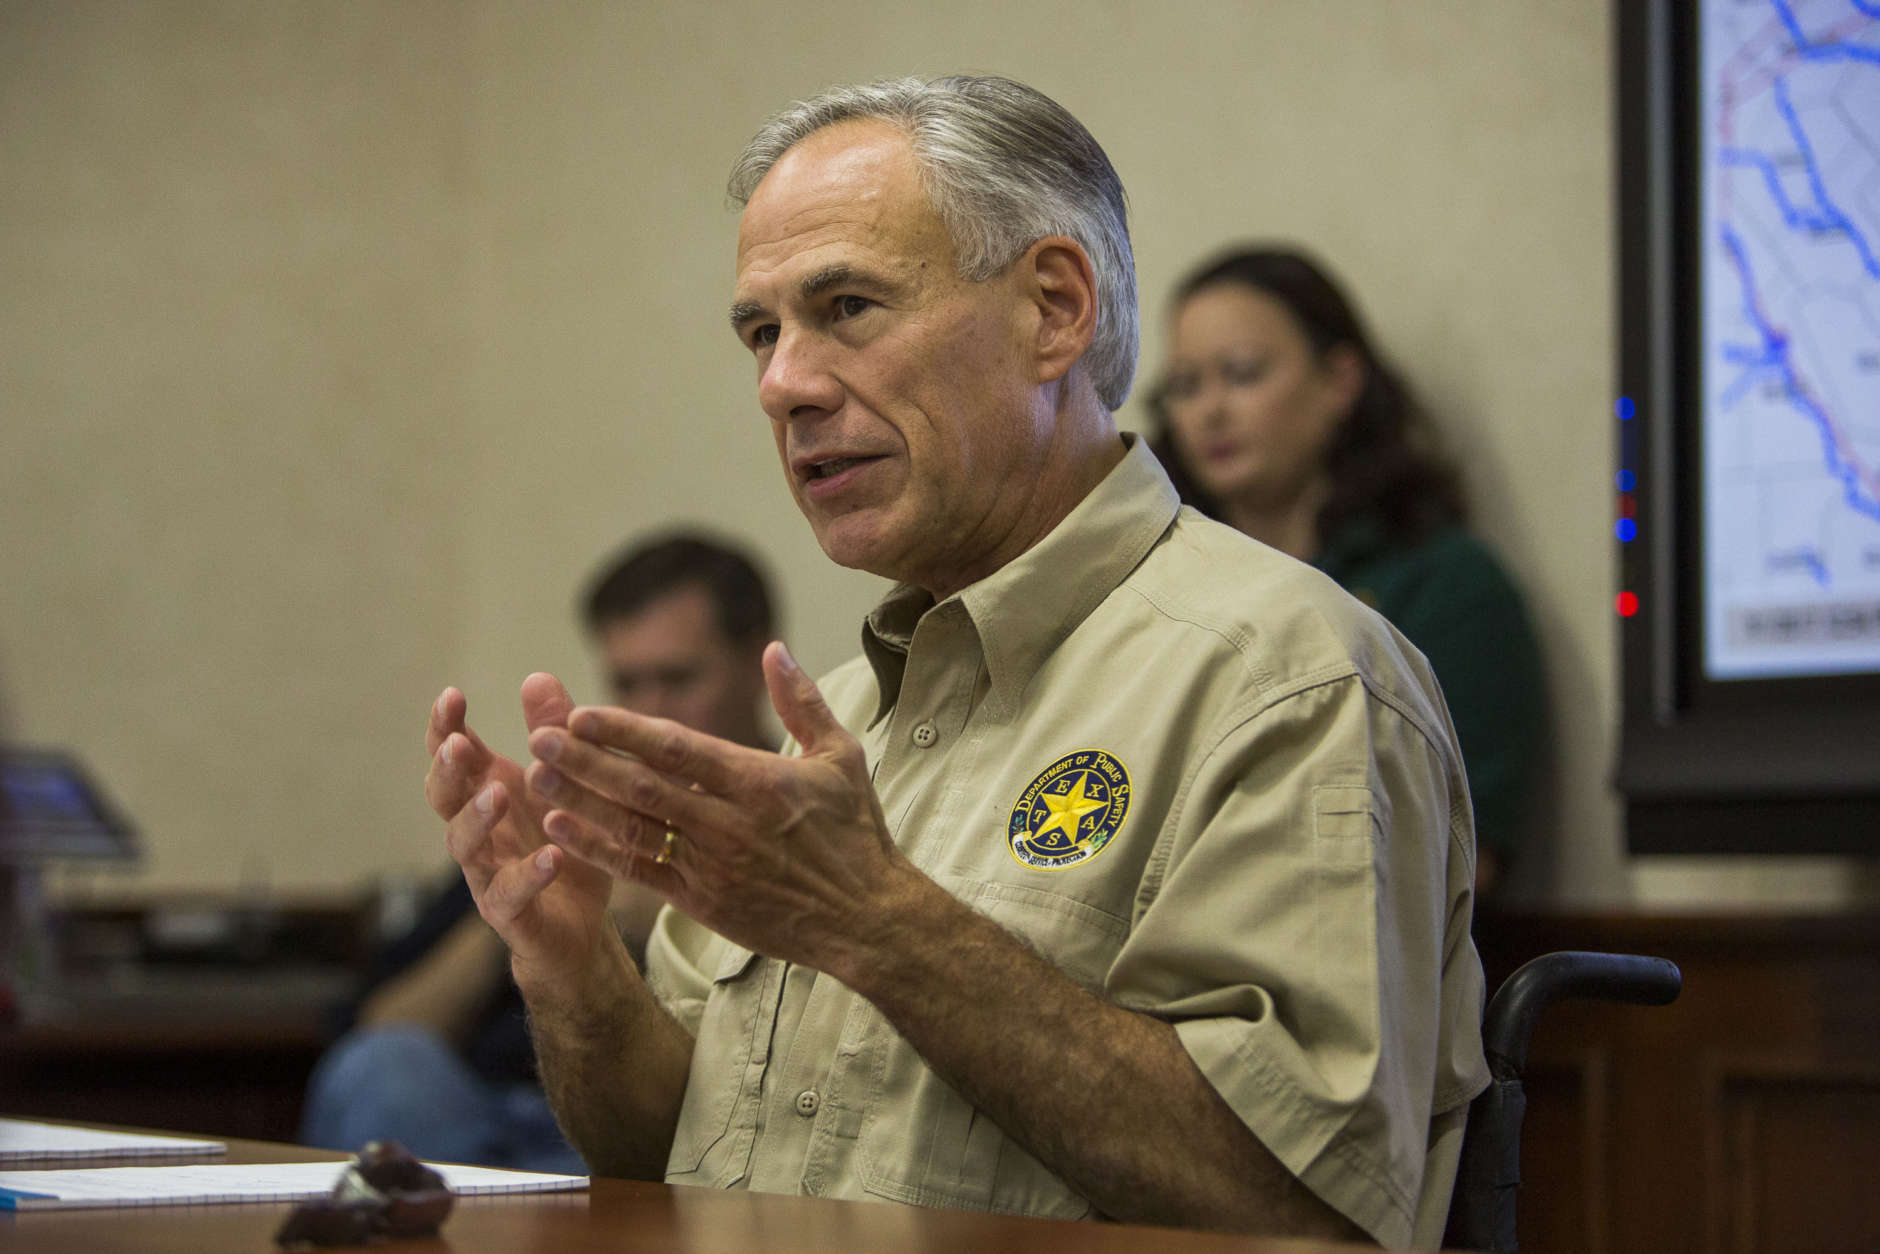 AUSTIN, TX - SEPTEMBER 01: Texas Governor Greg Abbott is briefed on Hurricane Harvey at the Texas Department of Public Safety building on September 1, 2017 in Austin, Texas.  Hurricane Harvey has caused wide spread flooding and mass evacuations in the Houston area.  (Photo by Drew Anthony Smith/Getty Images)